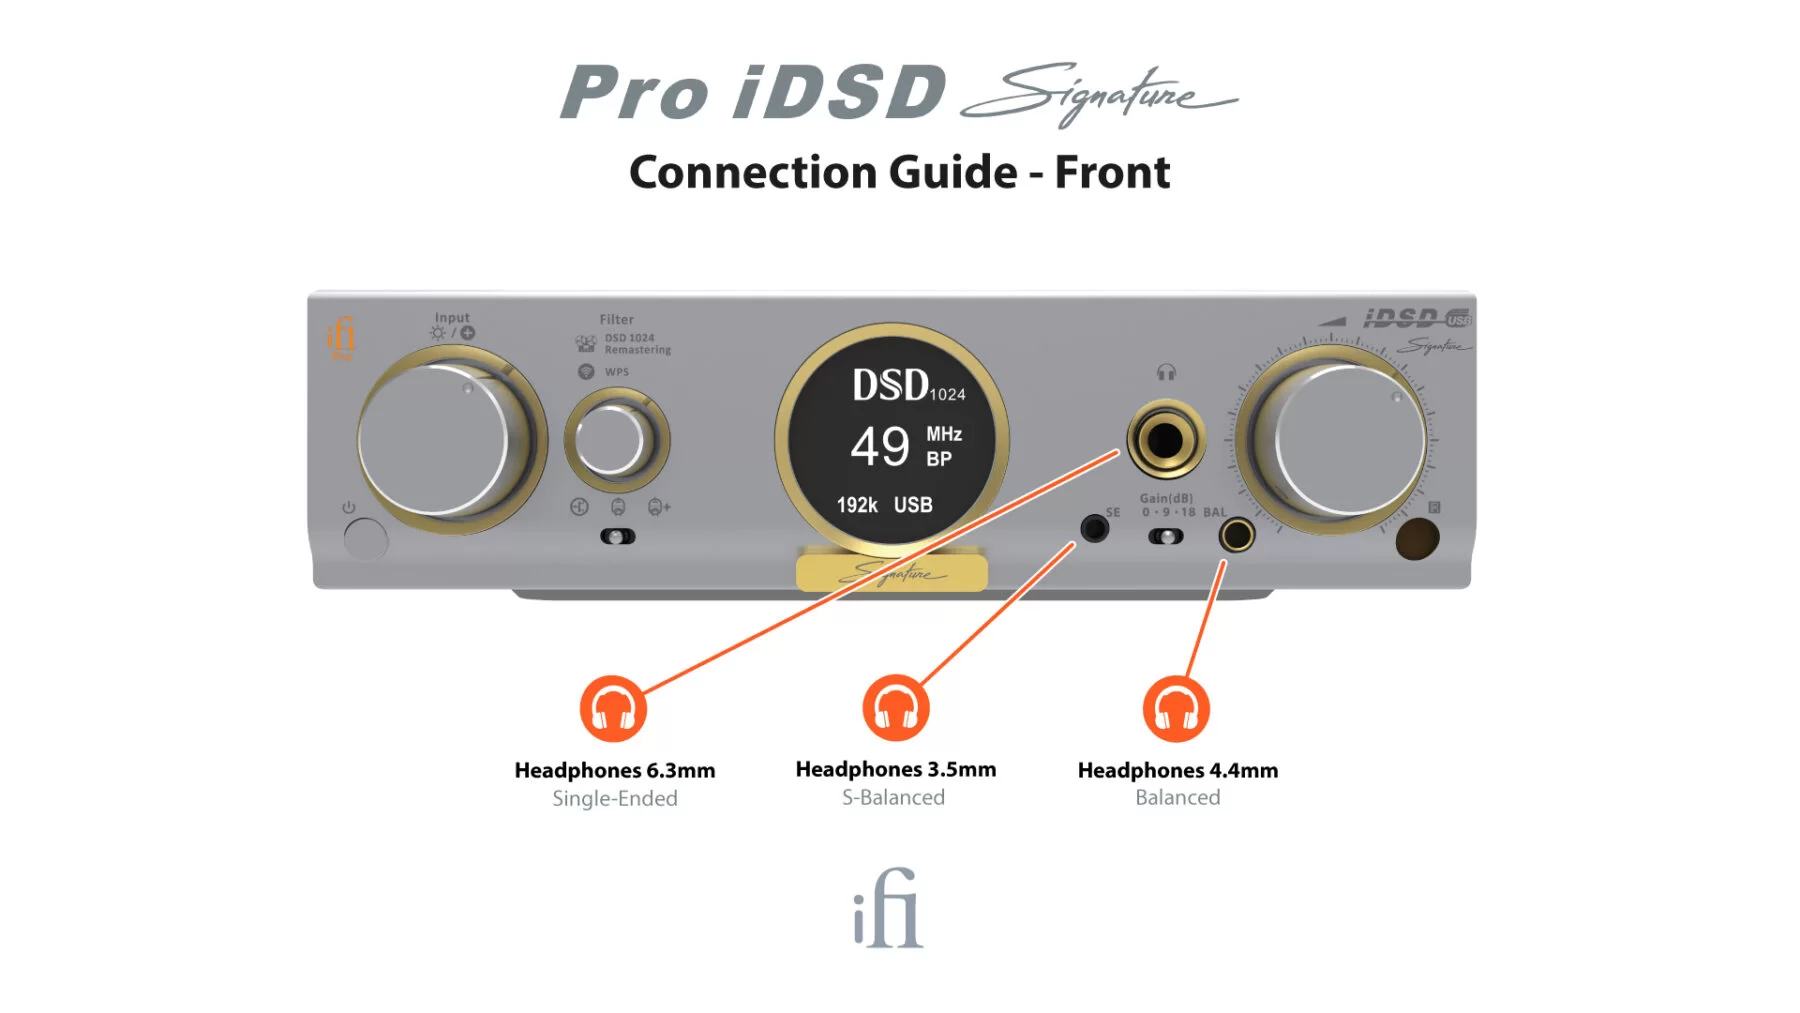 Pro iDSD Signature Connection Guide back banner